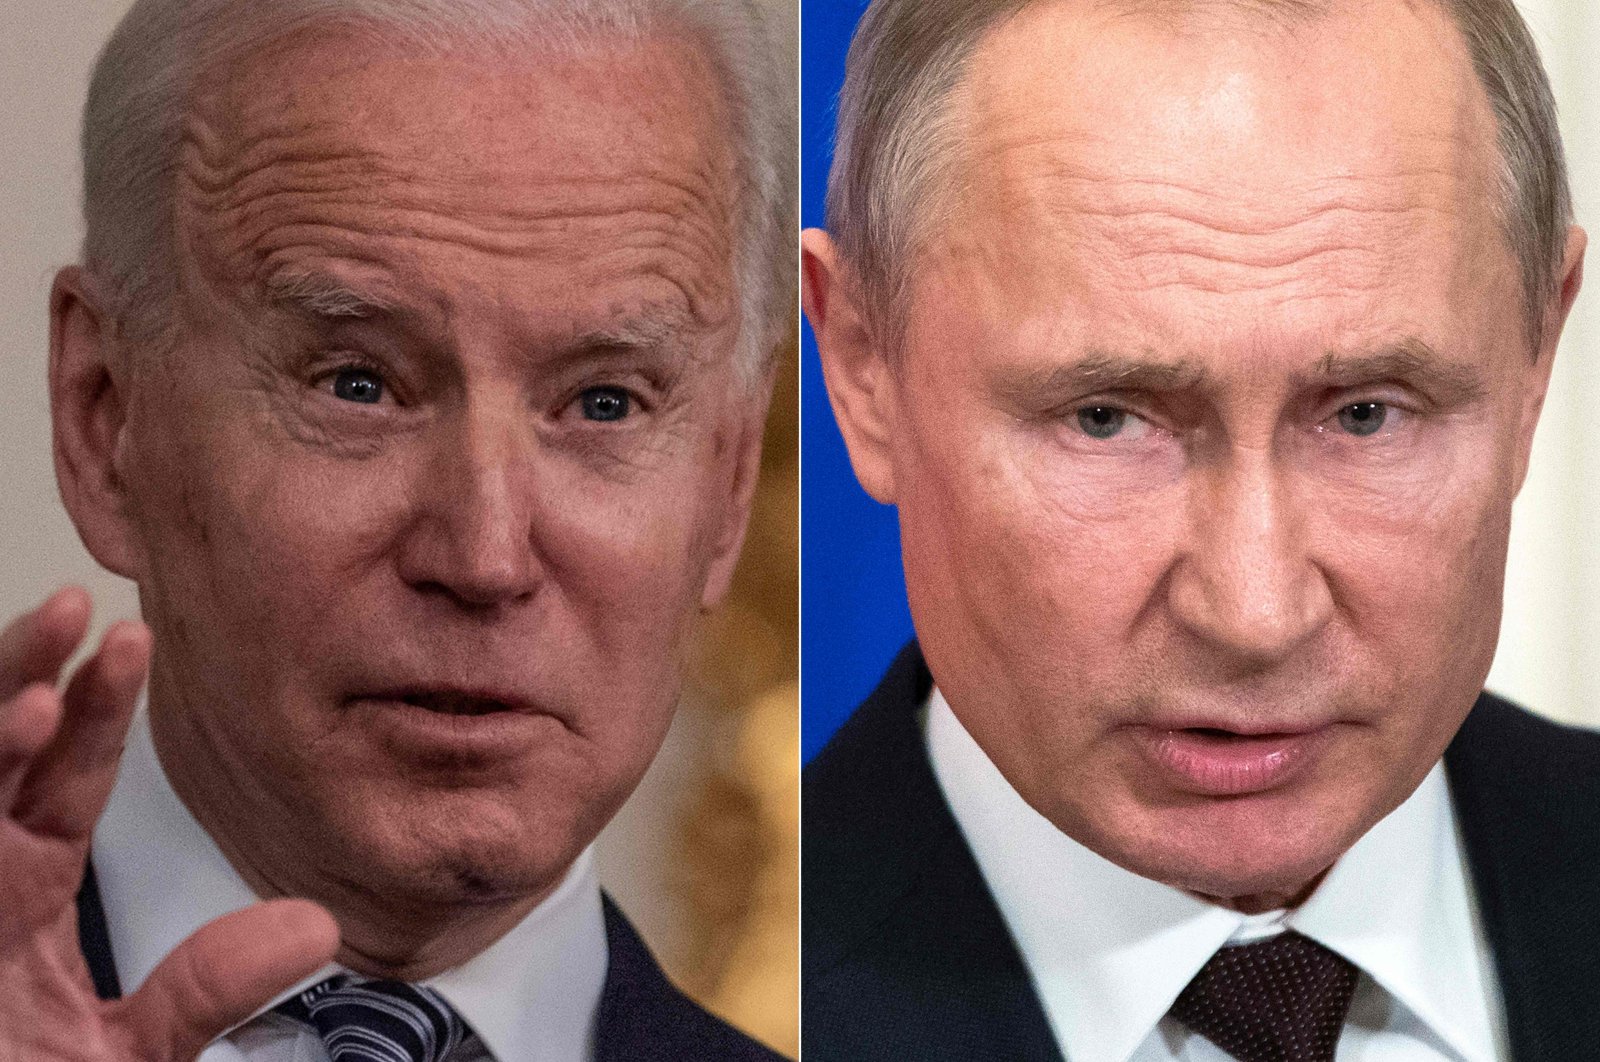 This combination photo shows U.S. President Joe Biden (L) speaking at the White House in Washington, D.C., U.S., on March 15, 2021, and Russian President Vladimir Putin speaking at a press conference in Moscow, Russia, March 5, 2020. (AFP Photo)